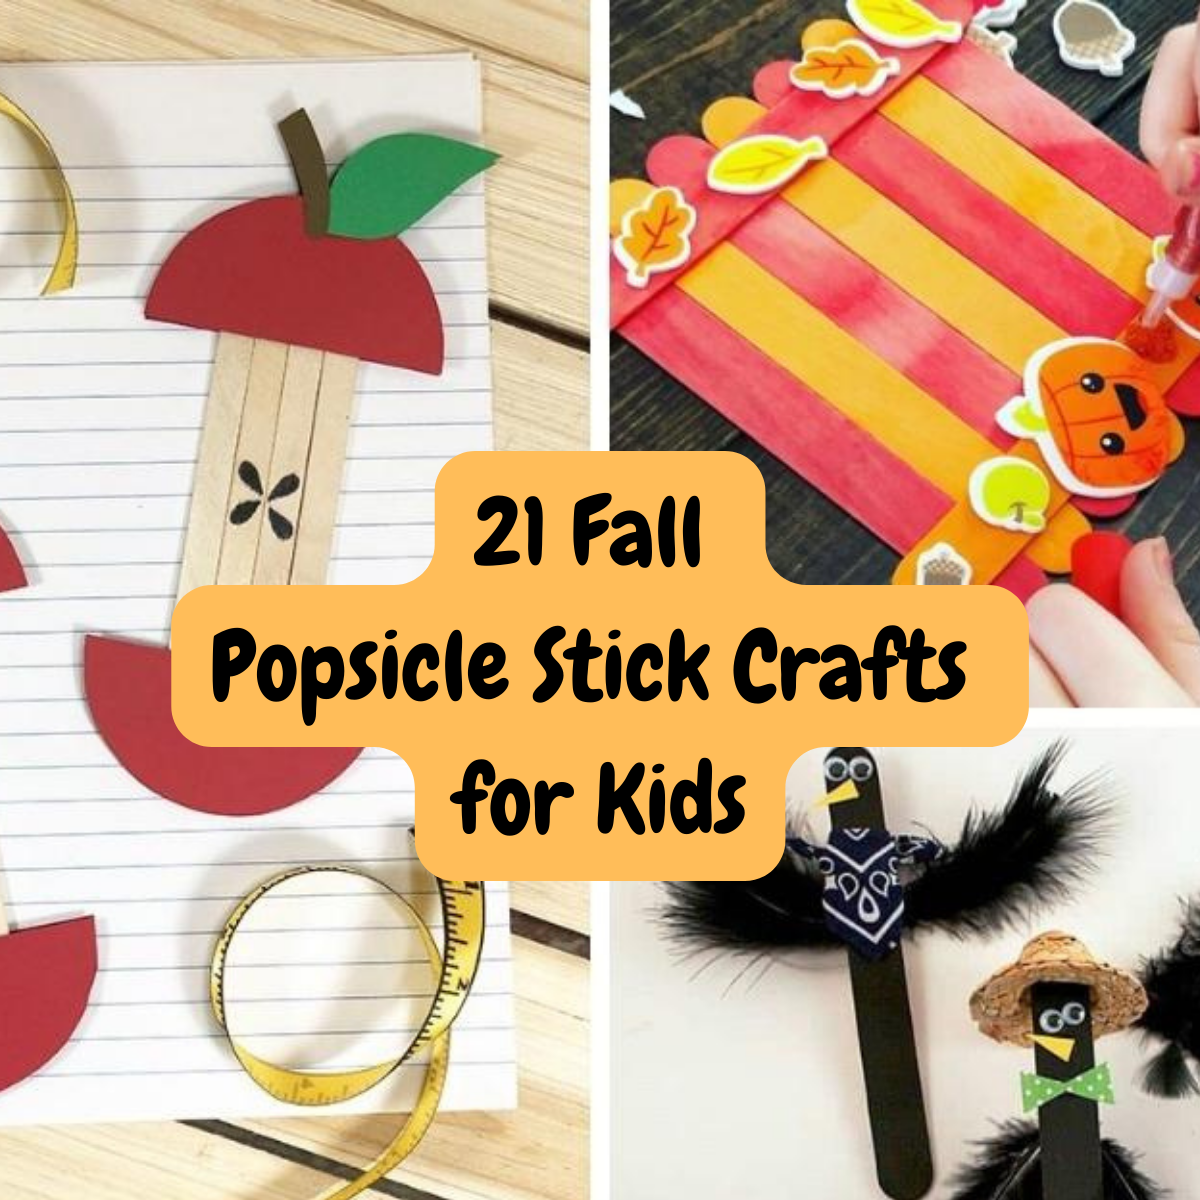 Fall Popsicle Stick Crafts For Kids | Projects for Home or School